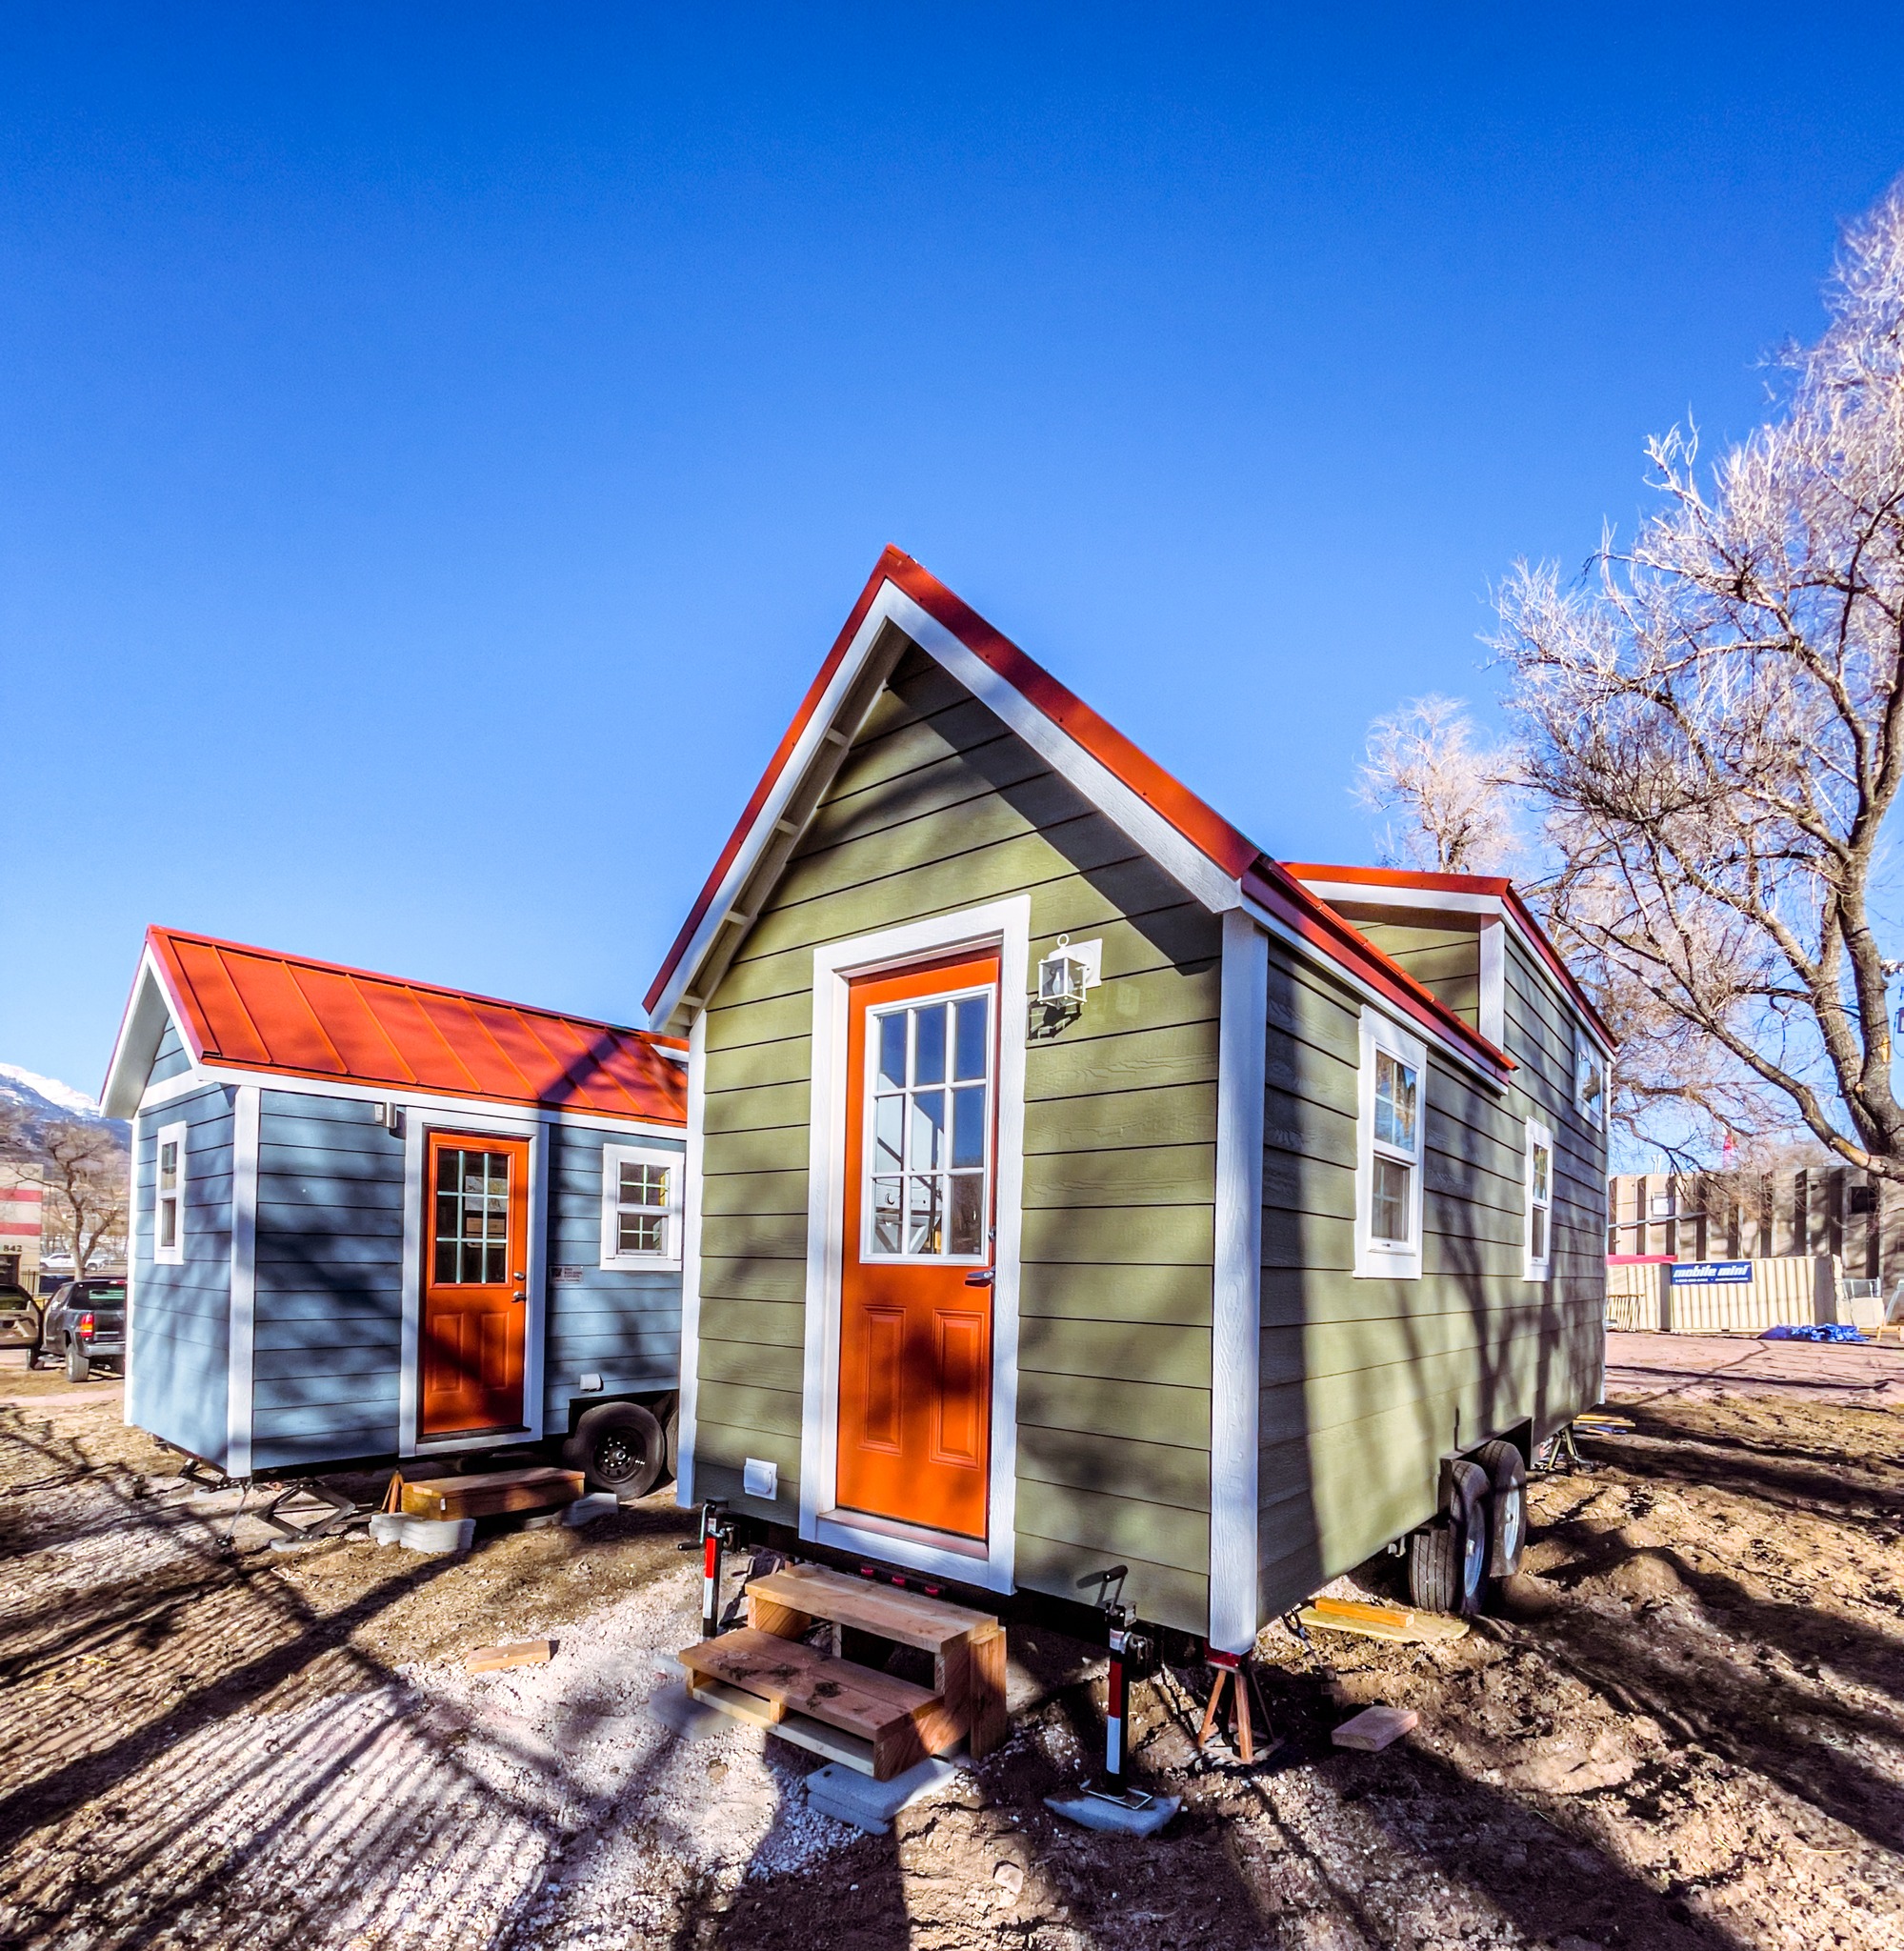 Working Fusion tiny home village* presenting W. Fountain Boulevard & S. Sierra Madre Street